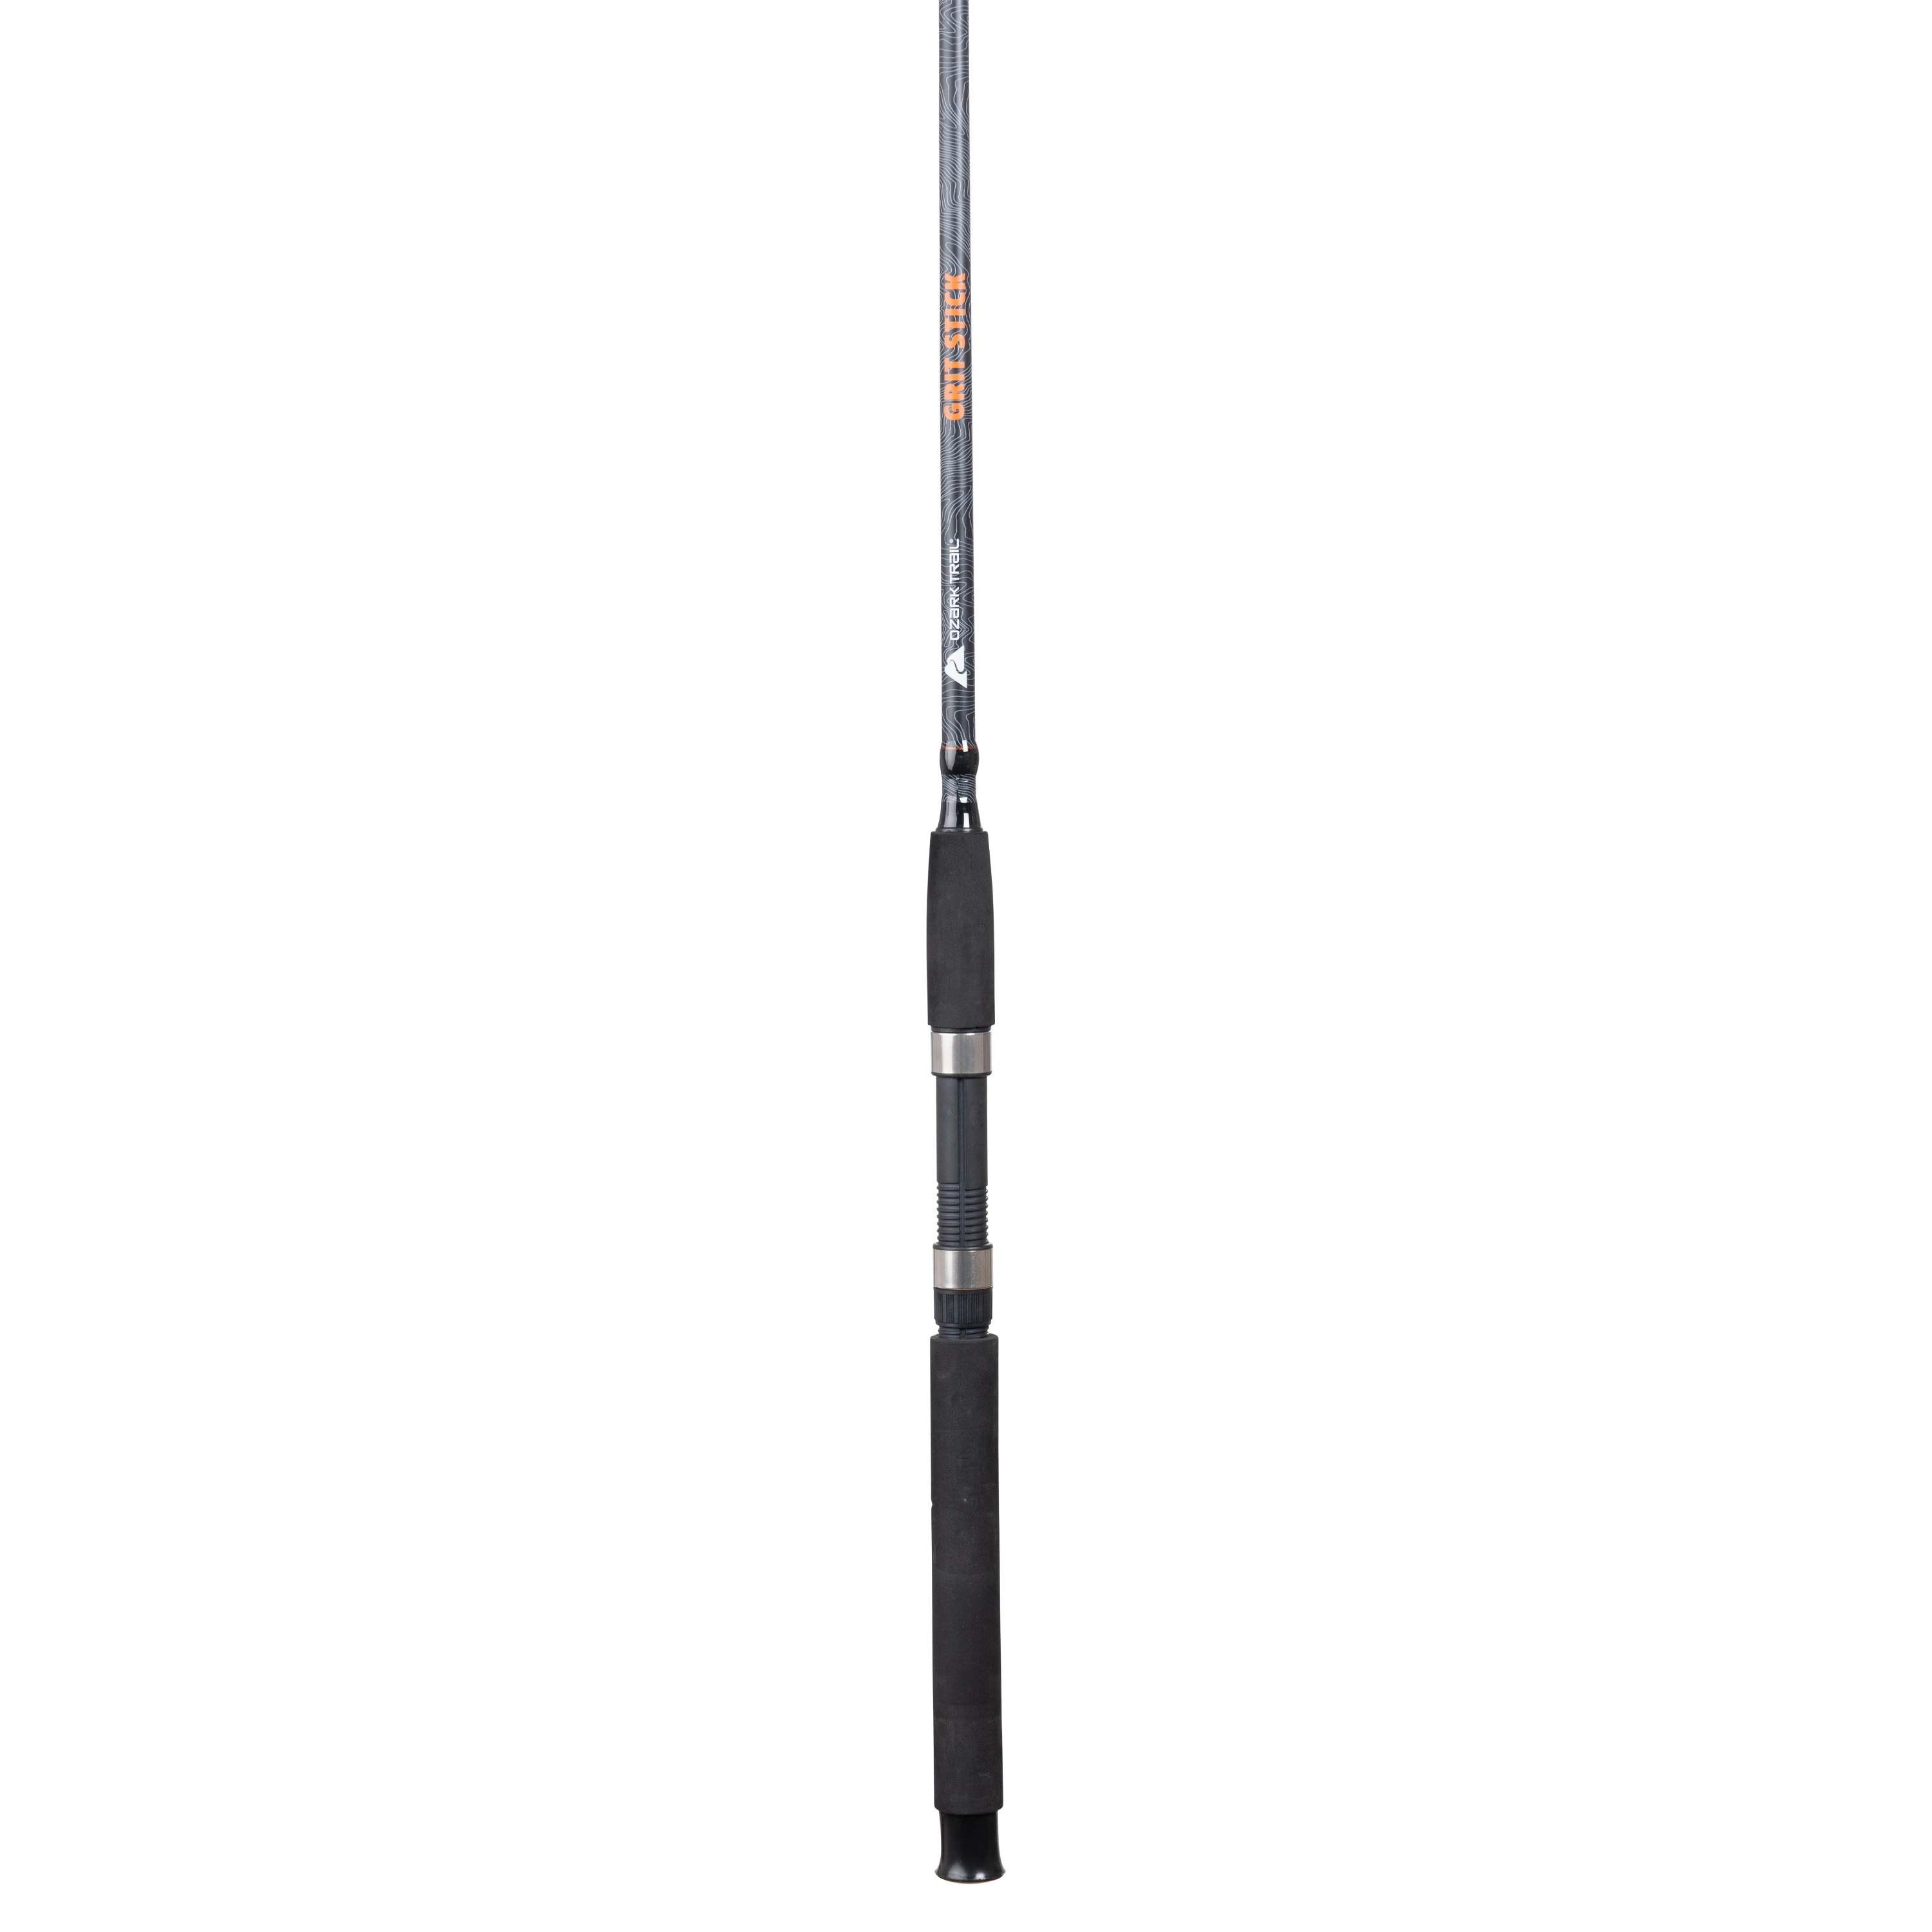 Ozark Trail Grit Stick Spinning Fishing Rod, Heavy Action, 7ft - image 4 of 7